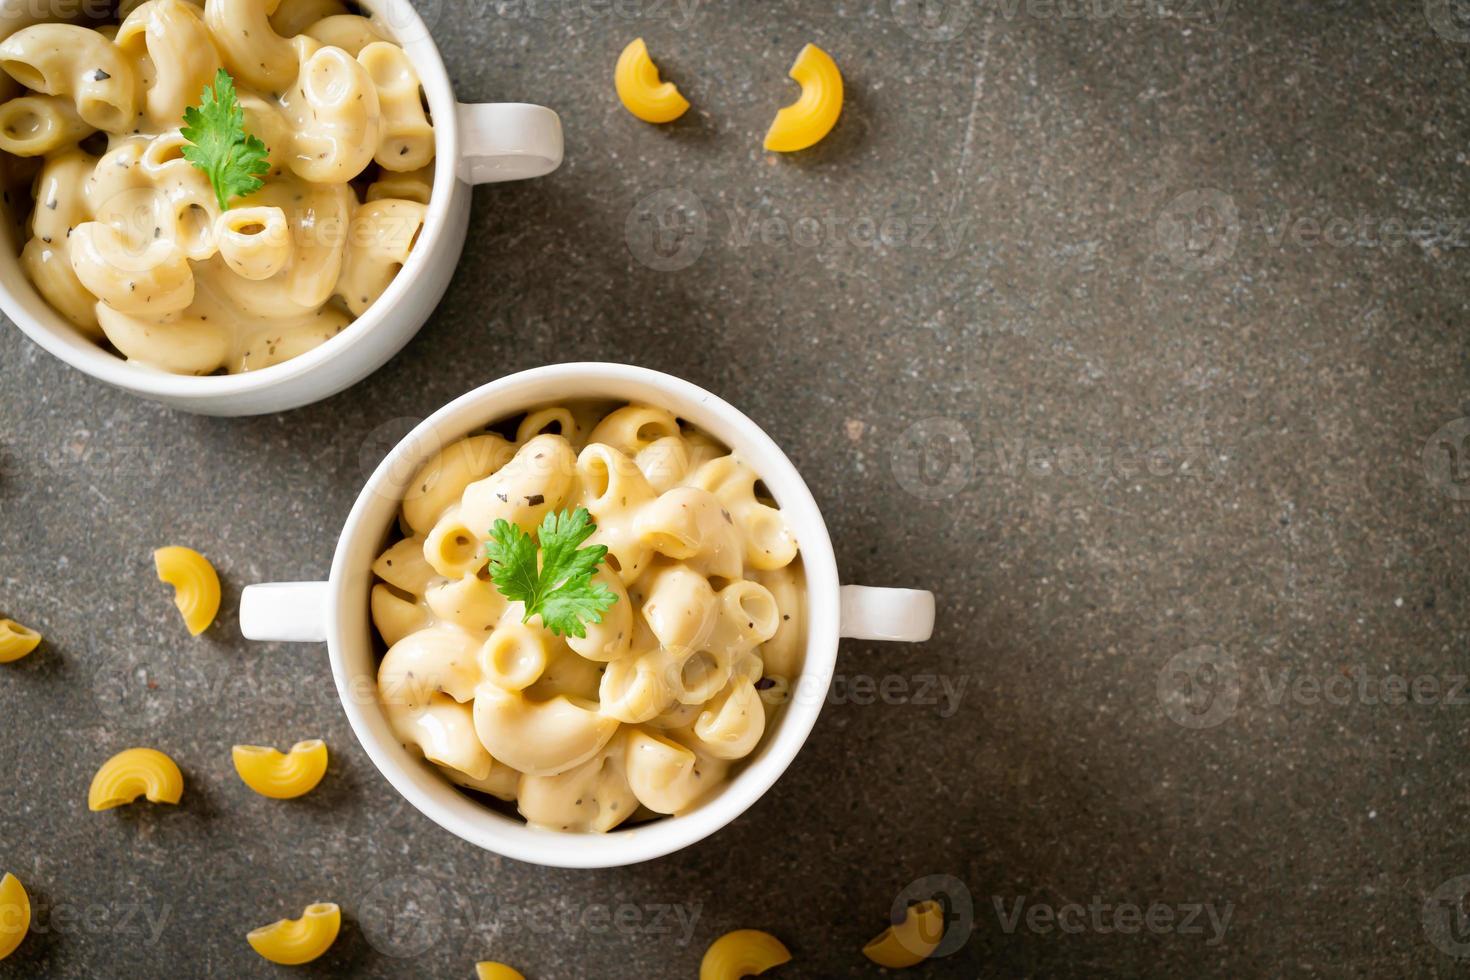 Macaroni and cheese with herbs in a bowl photo